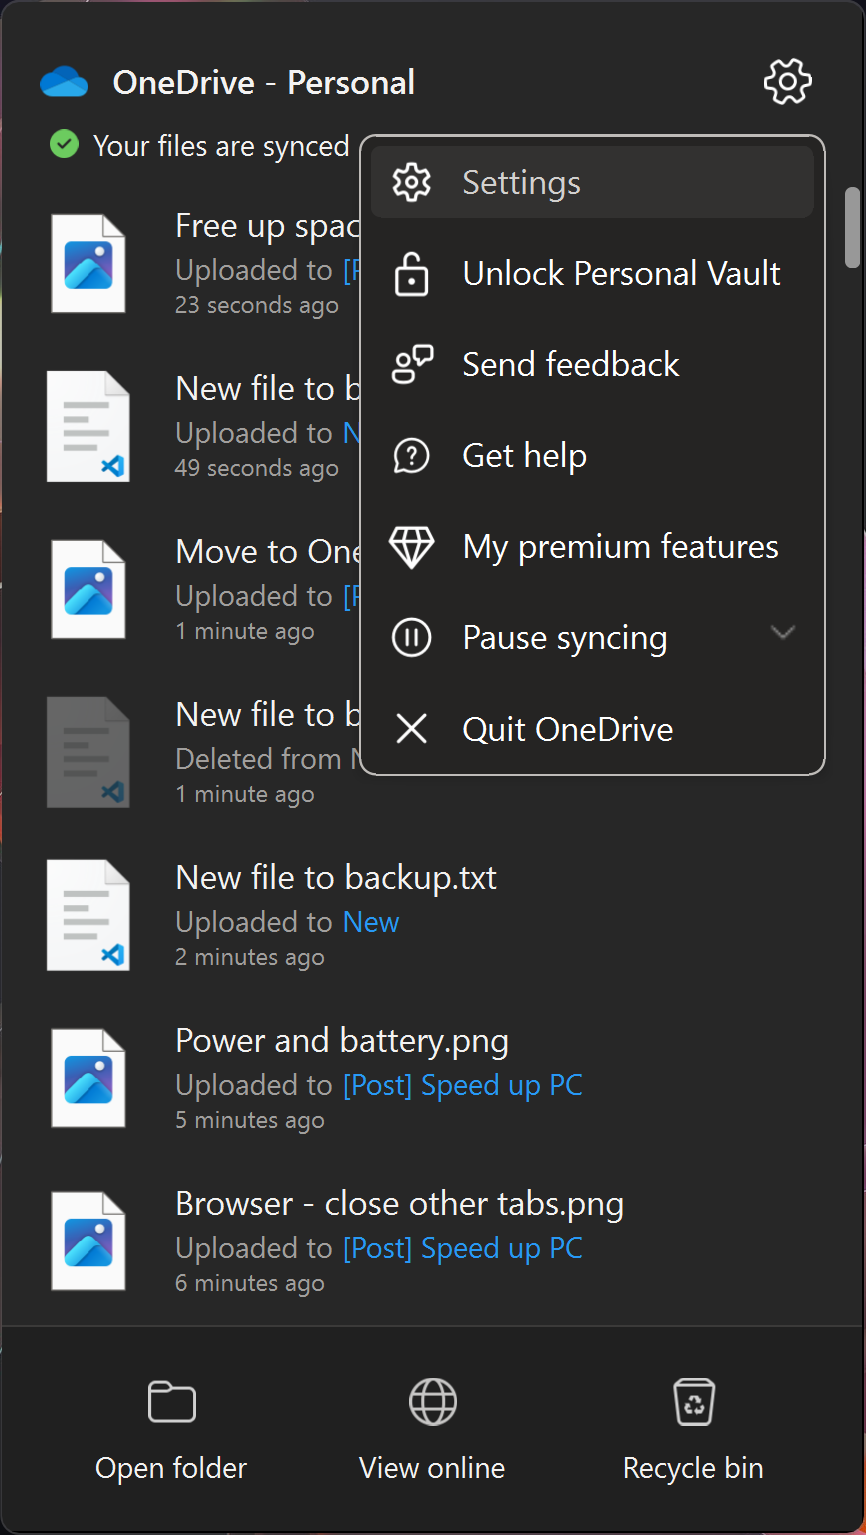 Top 10 Fixes to Speed Up Your Slow Windows 11 PC